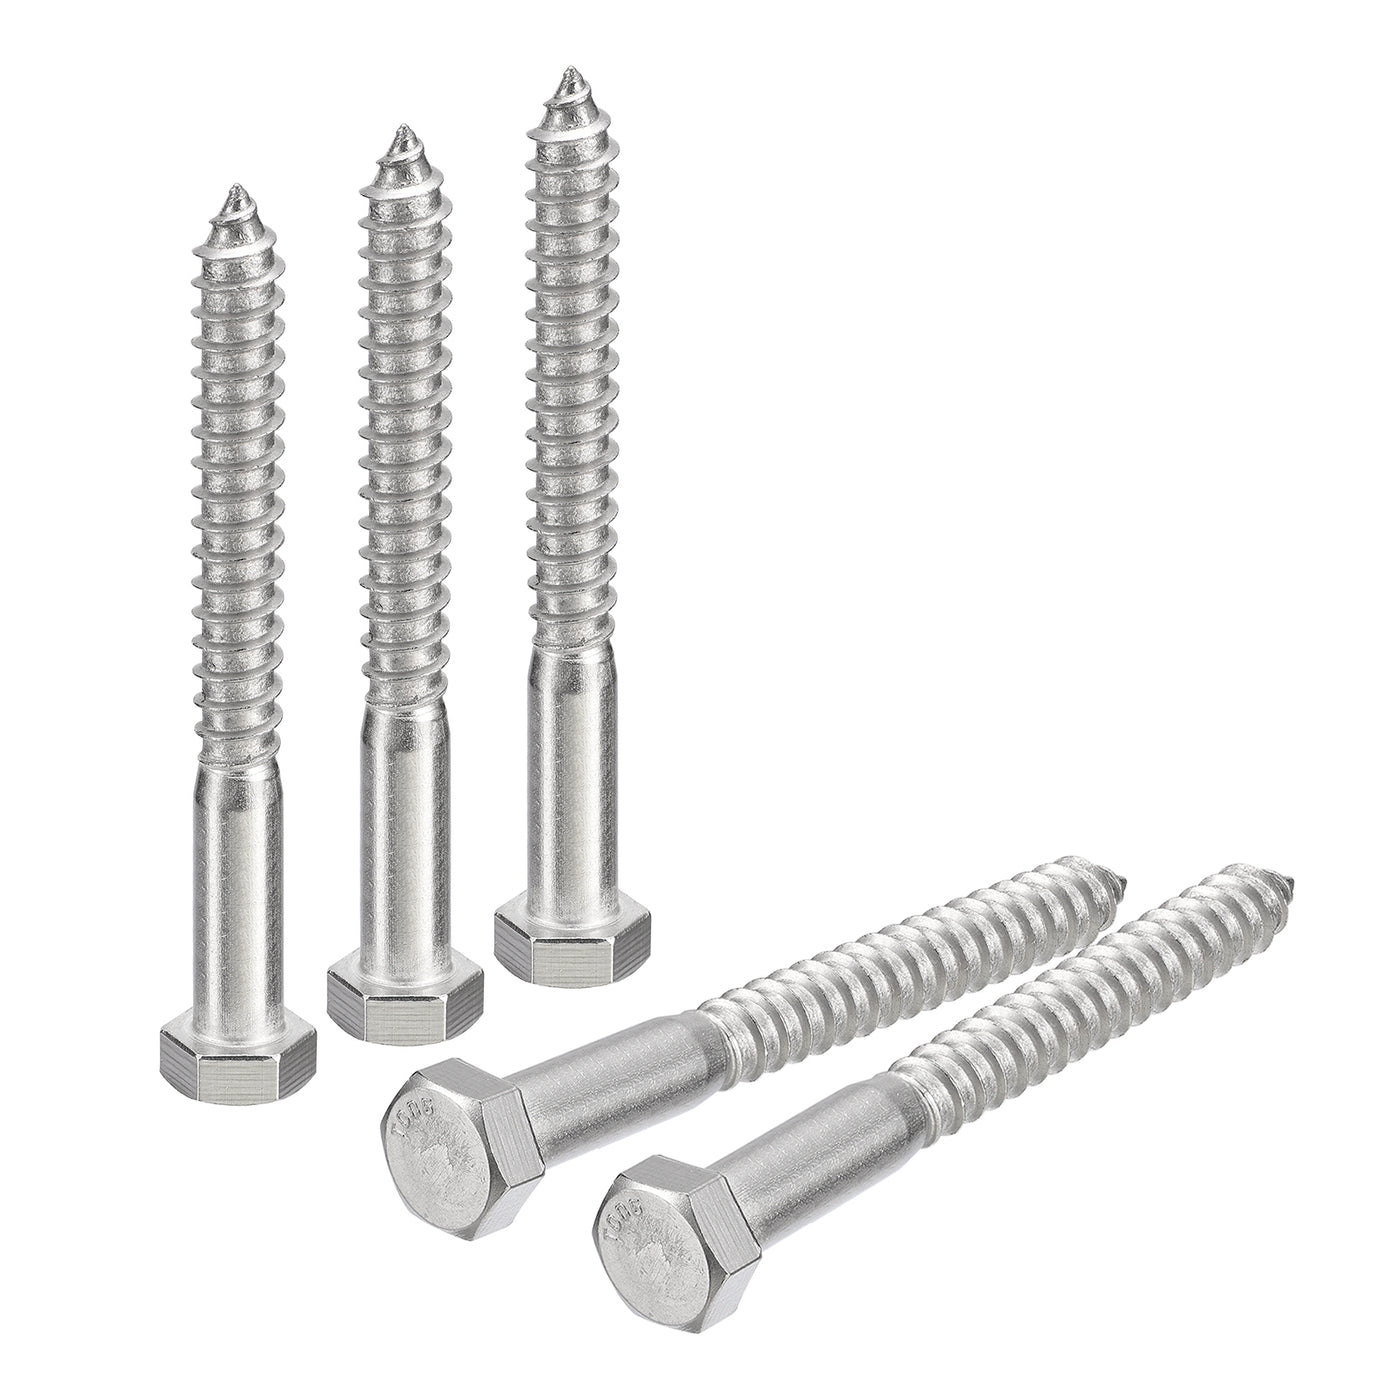 uxcell Uxcell Hex Head Lag Screws Bolts, 5pcs 1/2" x 5" 304 Stainless Steel Wood Screws